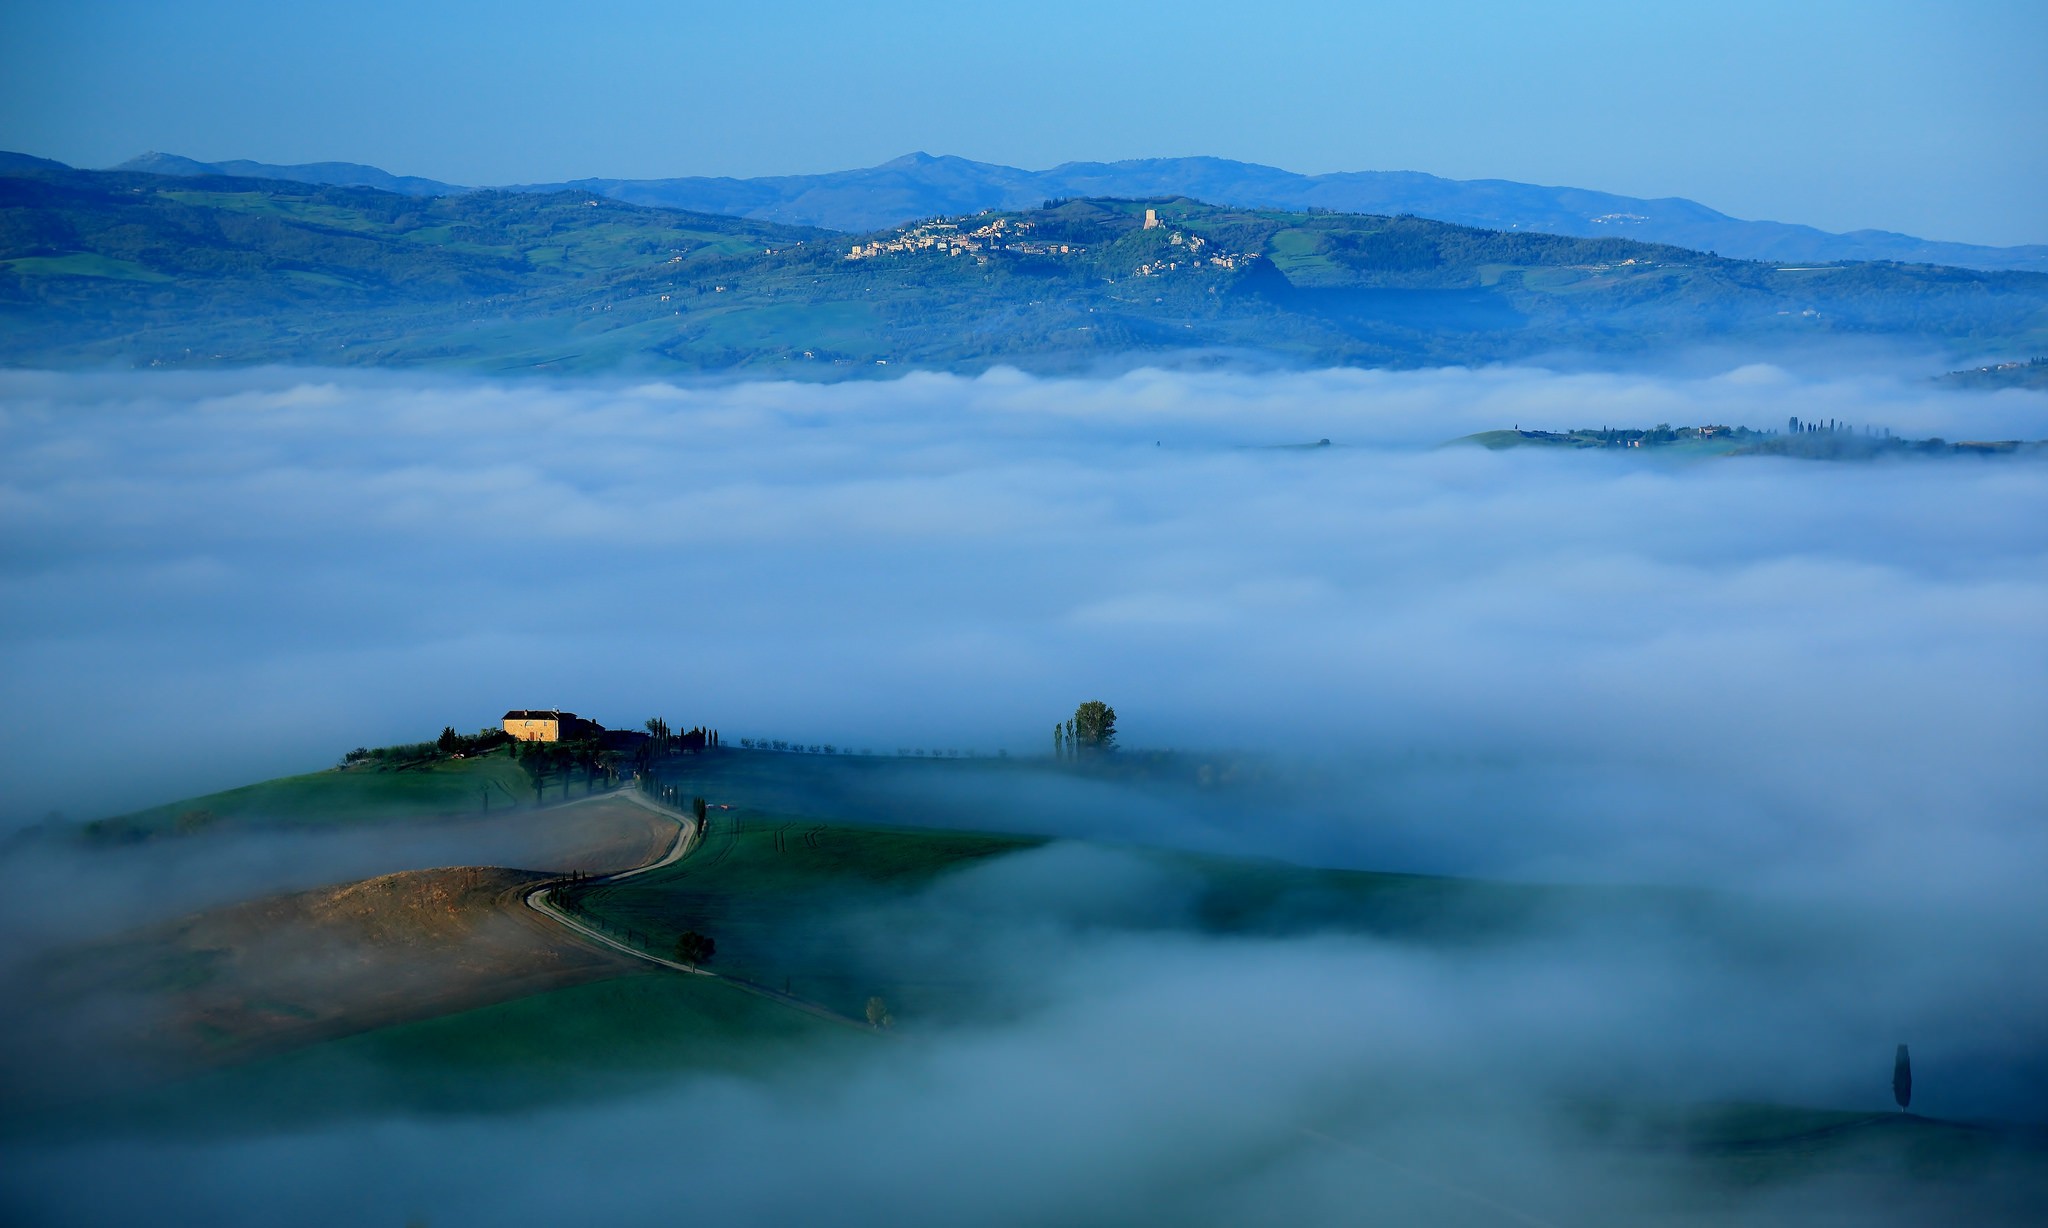 General 2048x1228 nature landscape Italy trees hills Tuscany house morning mist old building